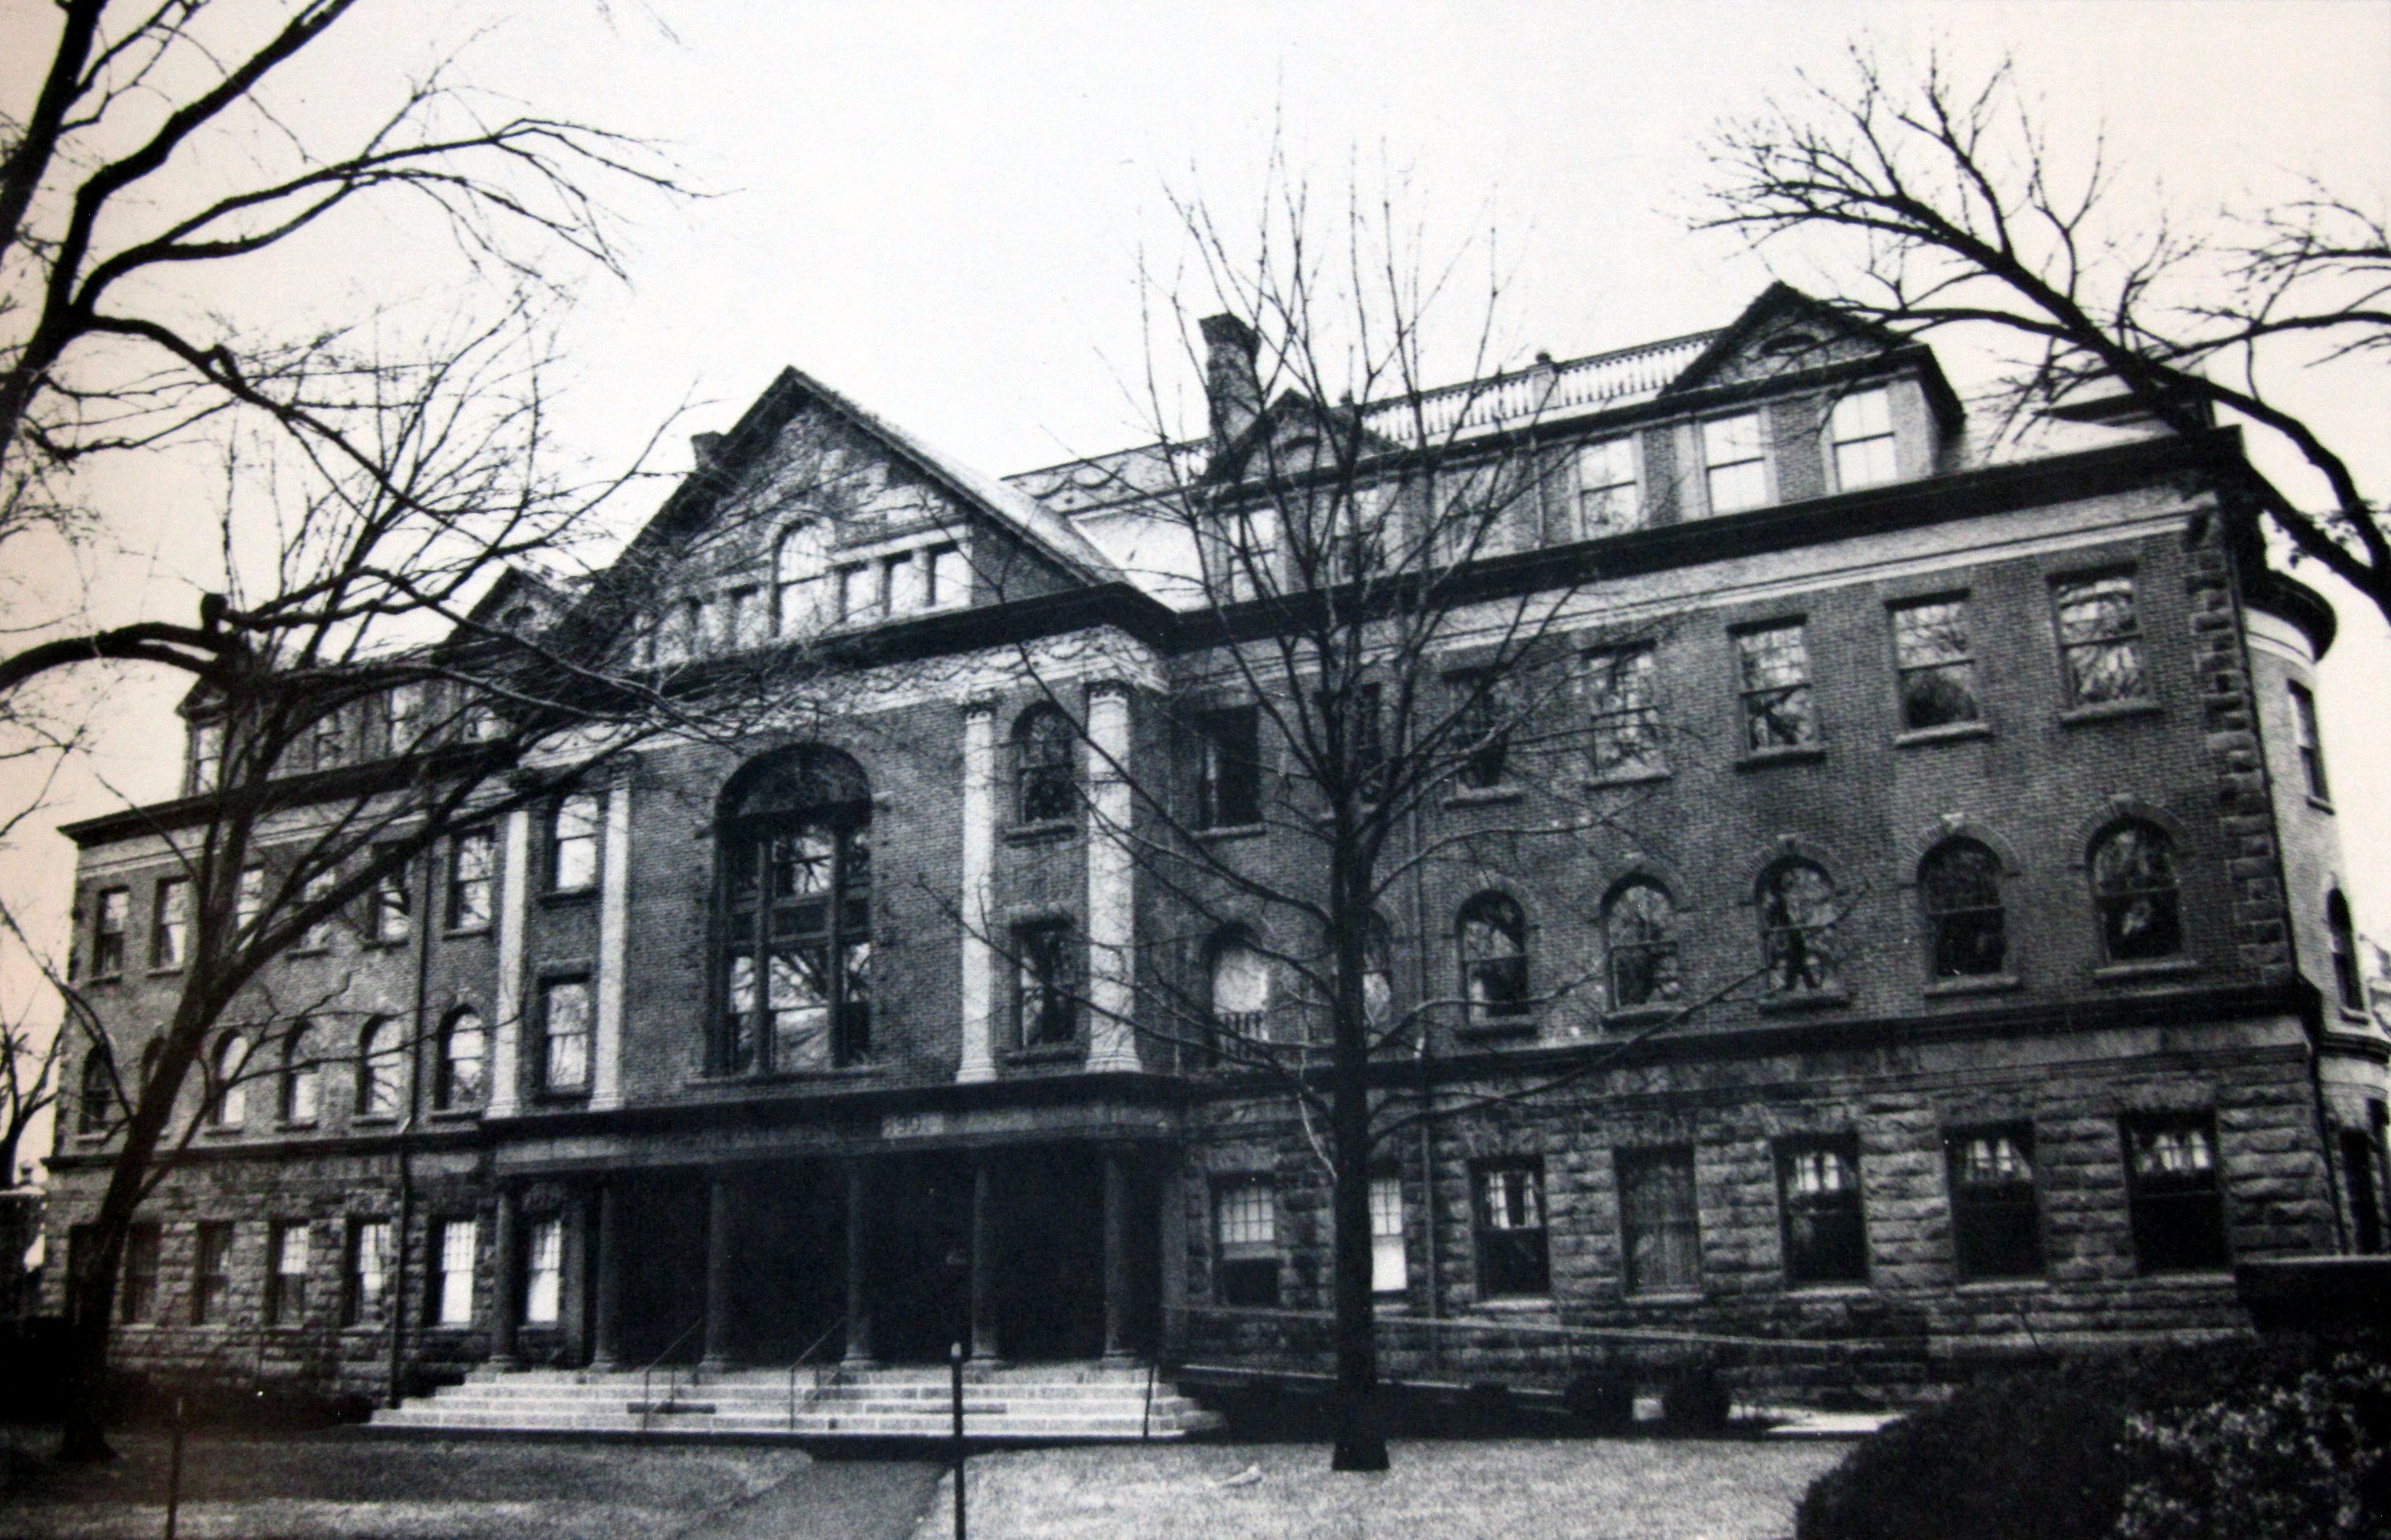 1991 Renovations on Winants Hall - The inside was gutted and rebuilt.